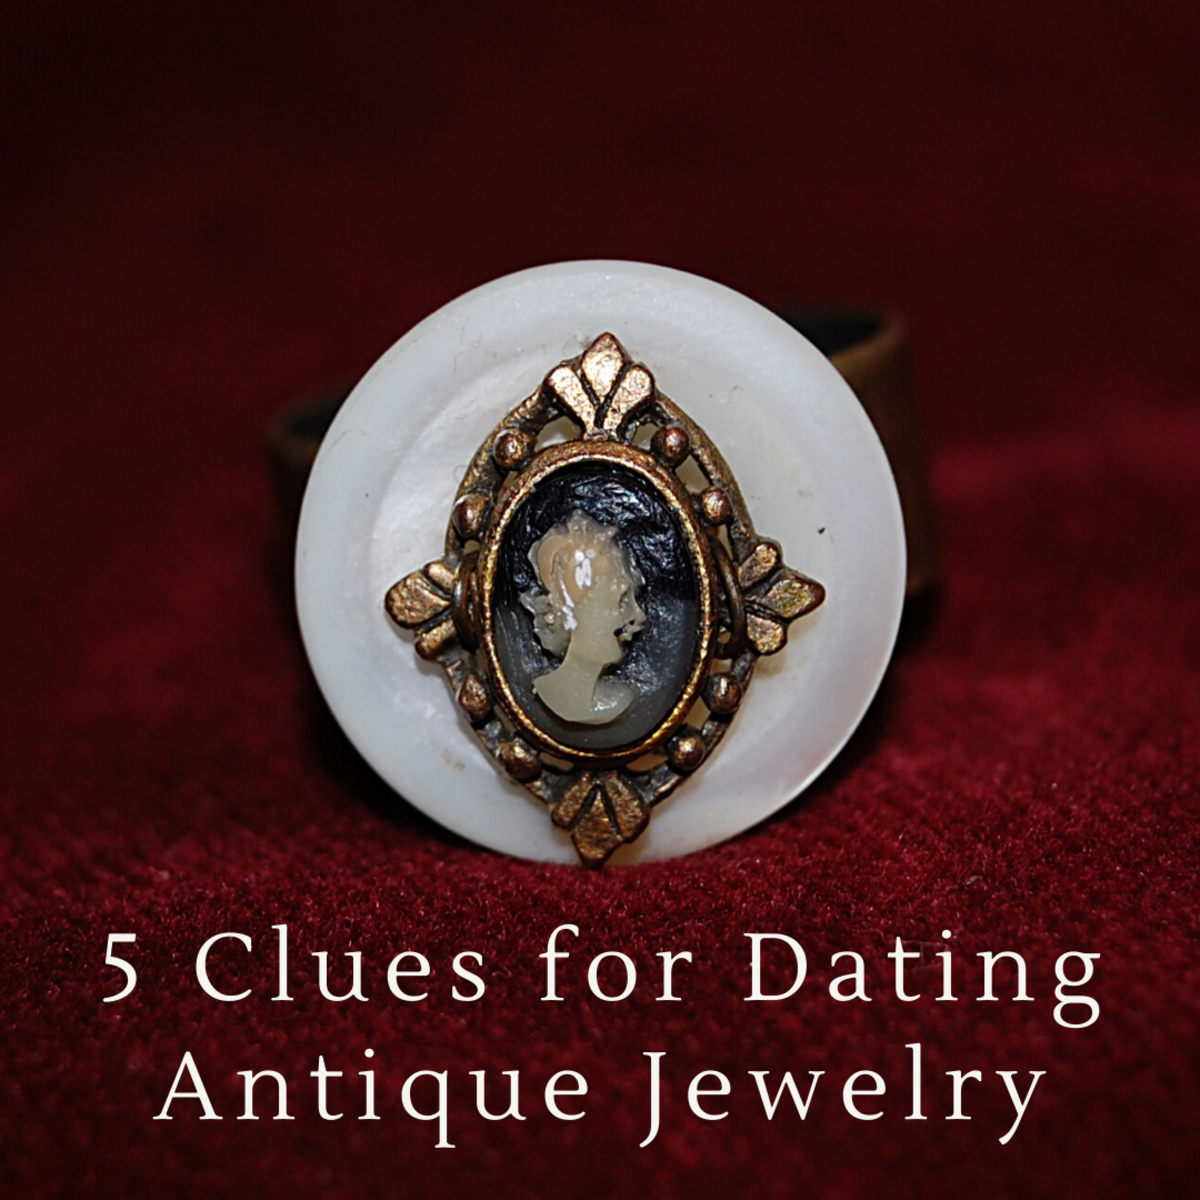 Download 5 Easy Clues for Dating Antique or Vintage Jewelry | HobbyLark